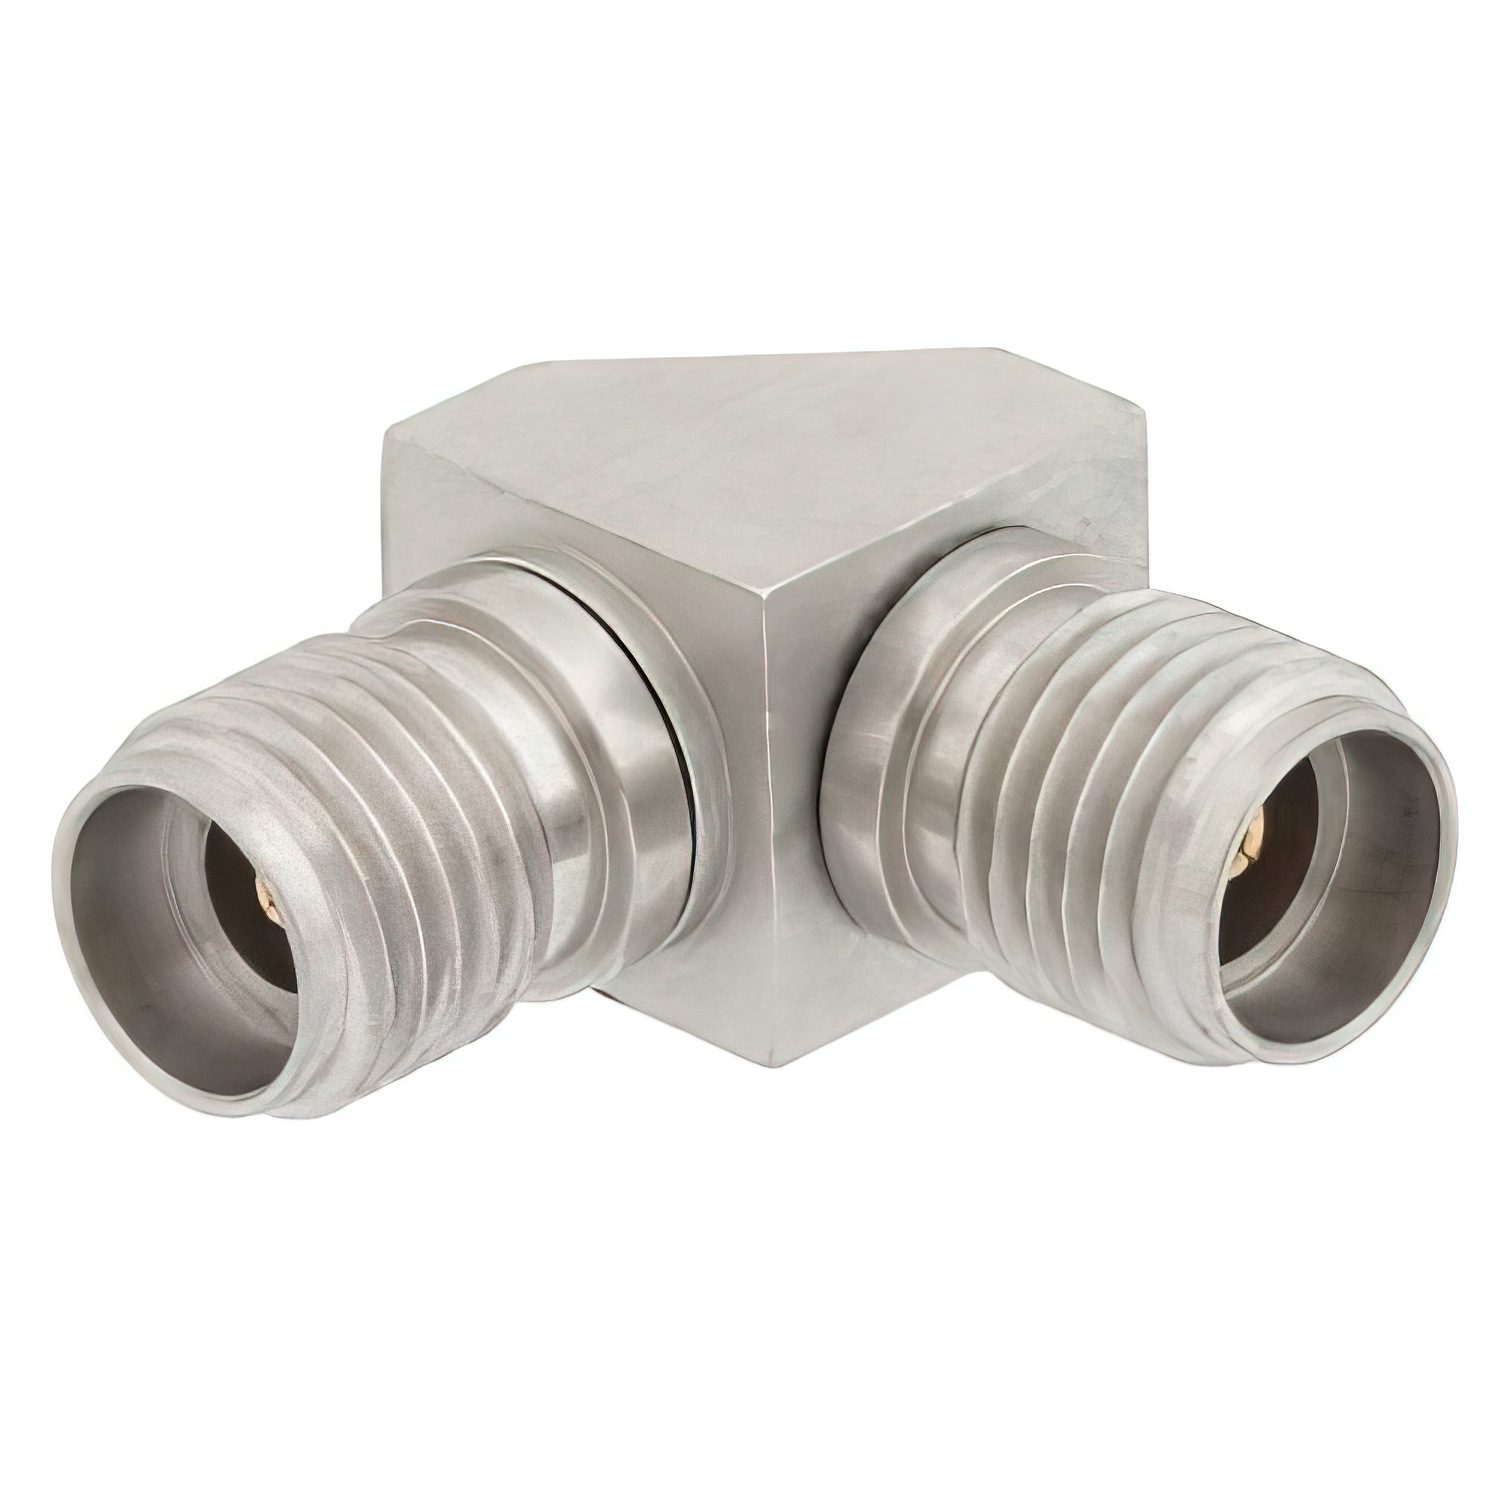 2.92mm Female to 3.5mm Female Right Angle Adapter1